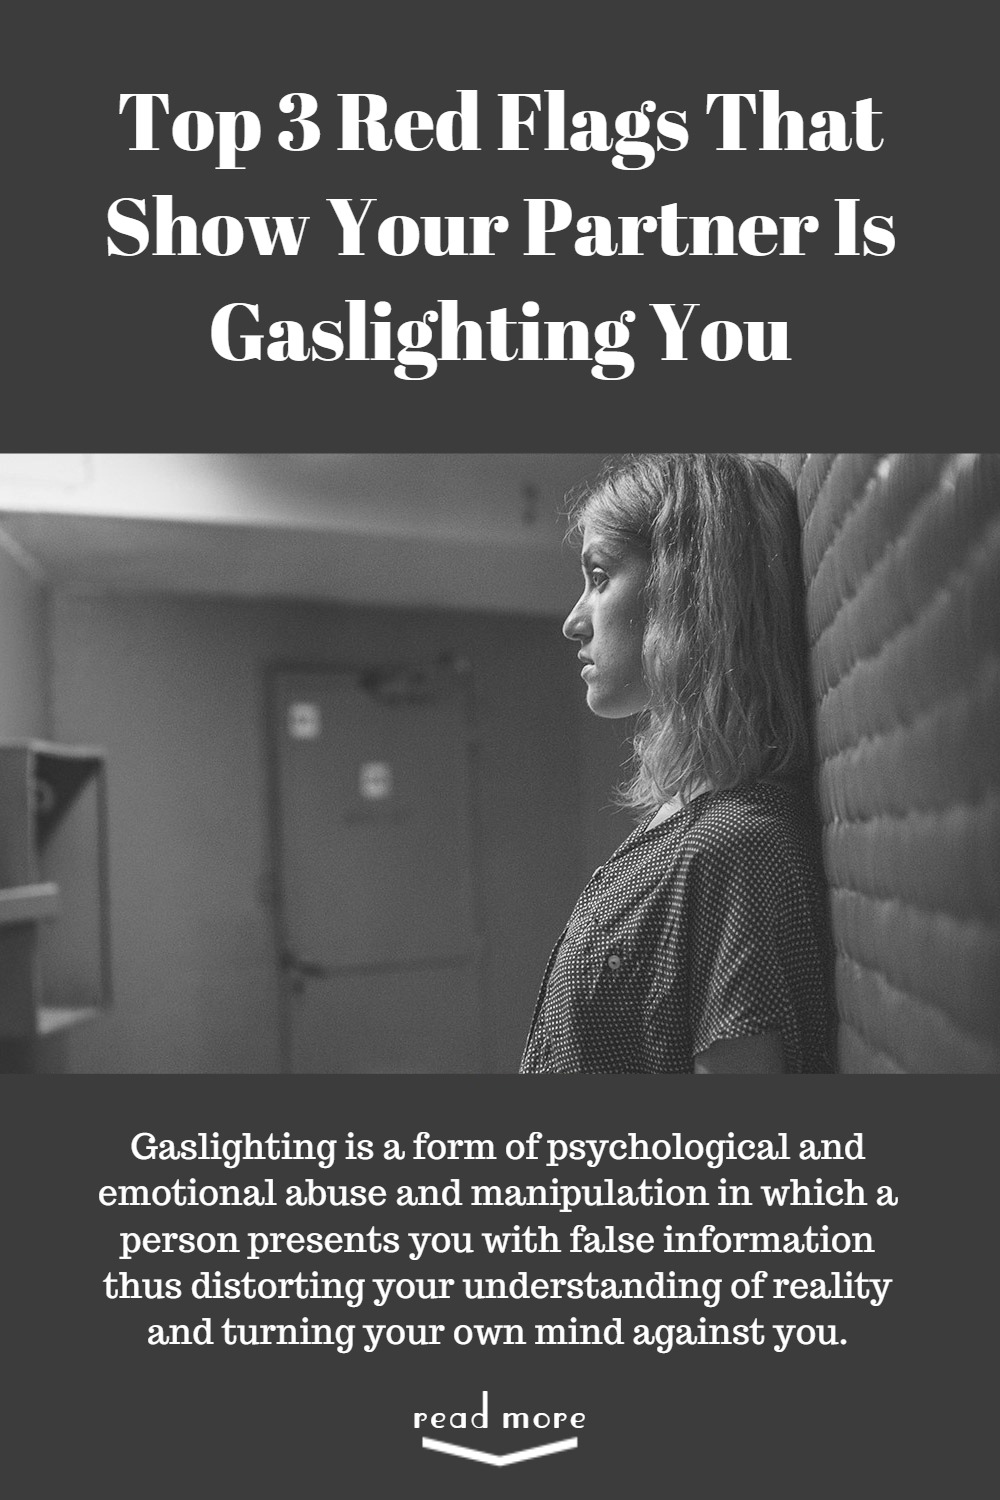 Top 3 Red Flags That Show Your Partner Is Gaslighting You